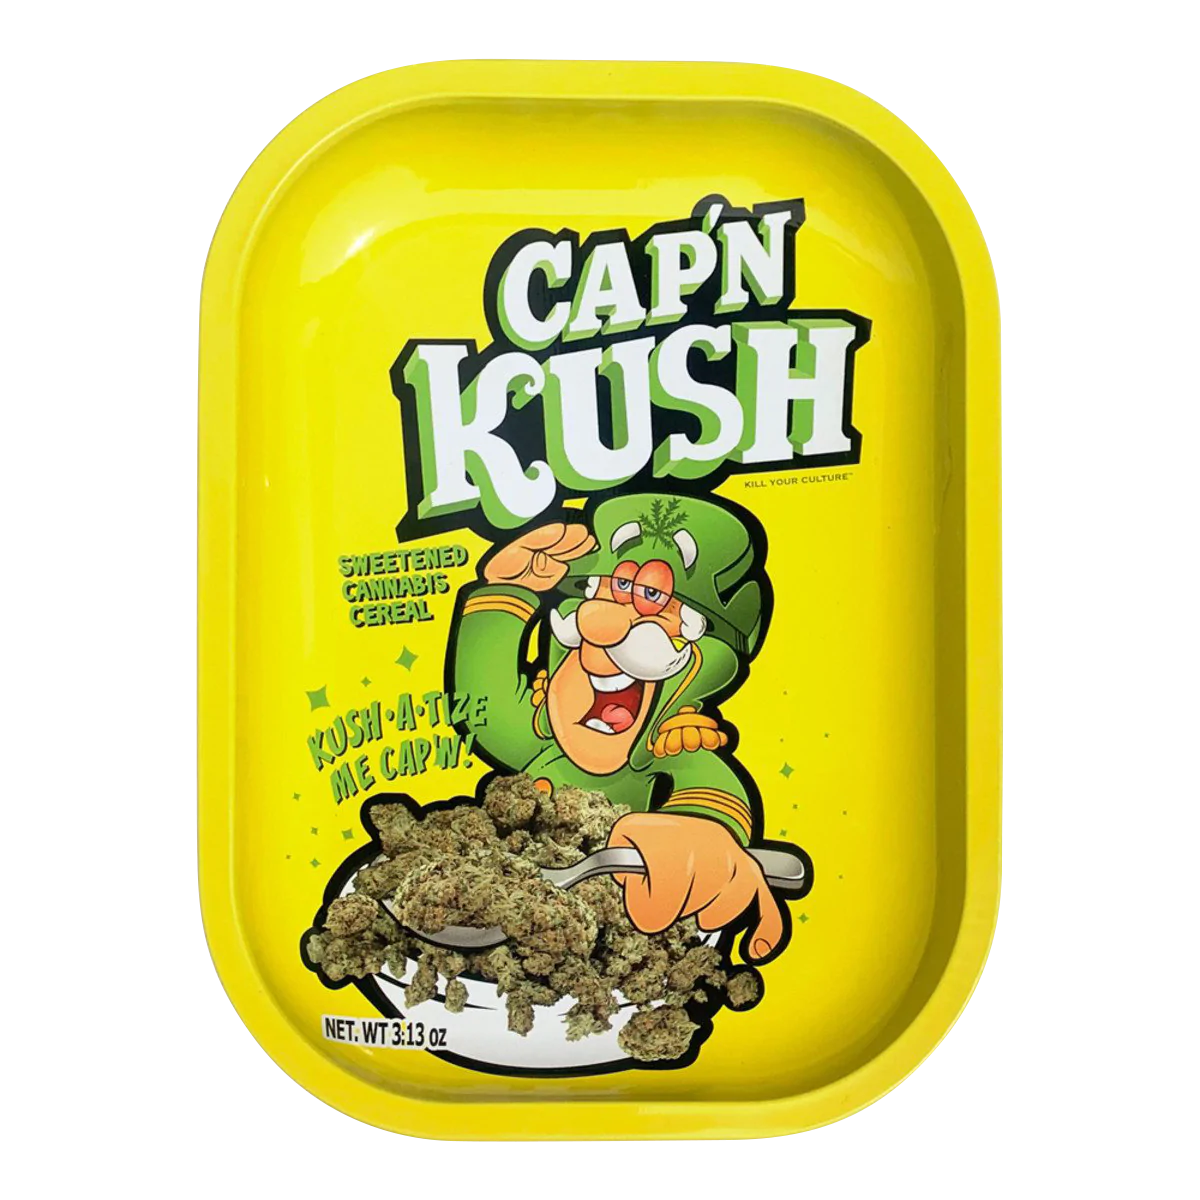 Kill Your Culture 'Cap 'N' Kush' Metal Rolling Tray - 5.5" x 7" Front View